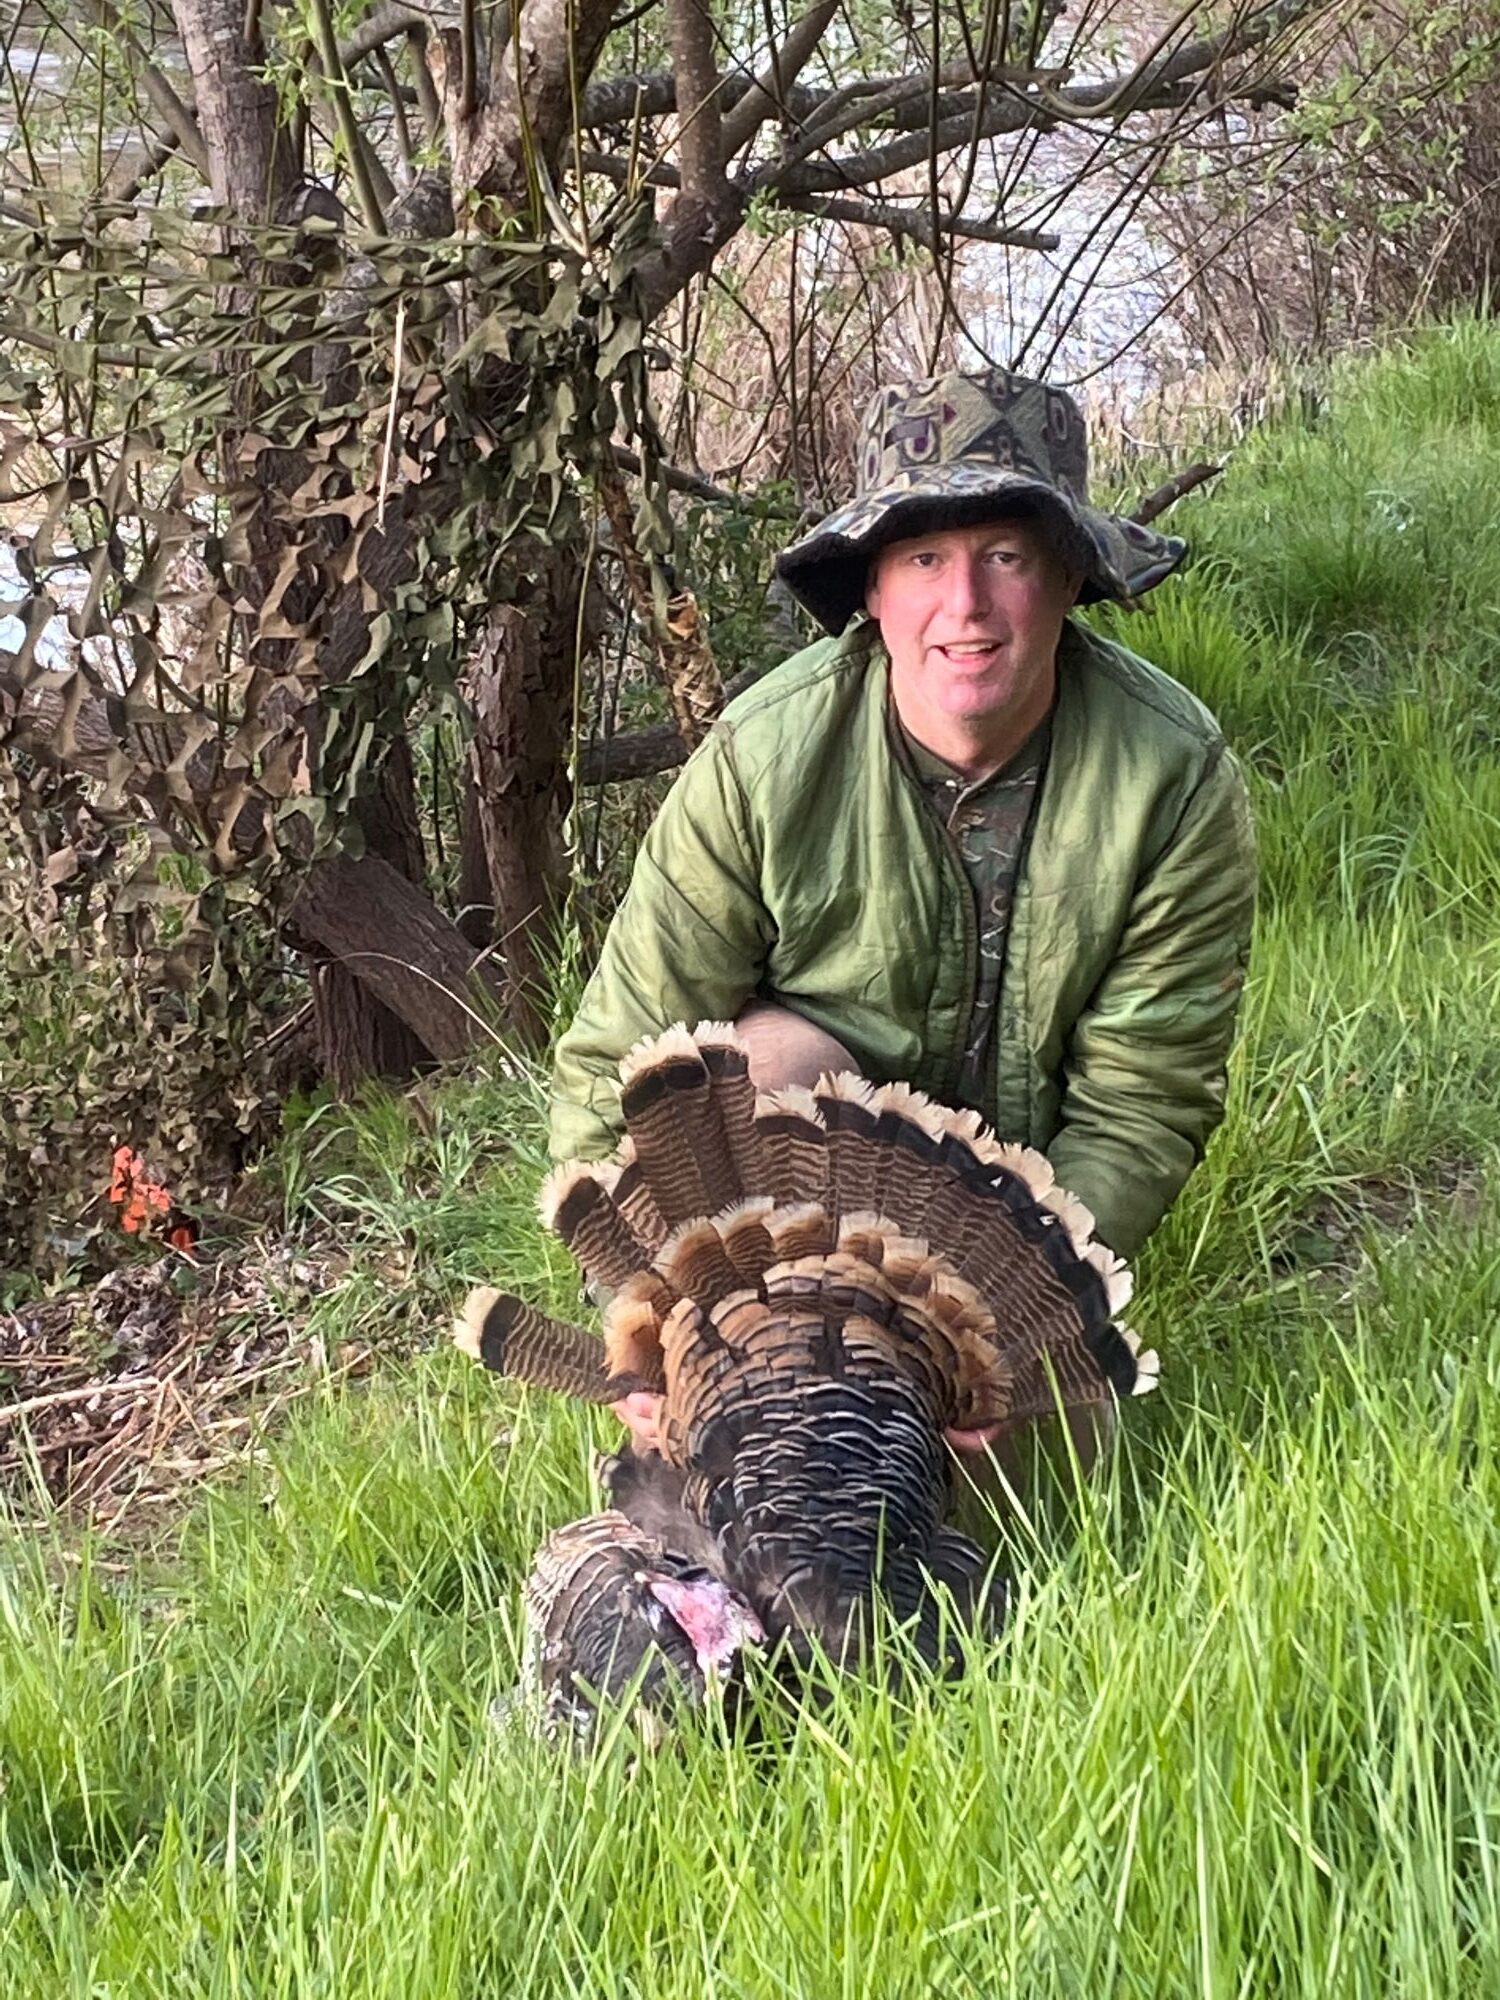 Eric after a successful turkey hunt, one of his hobbies outside of work.